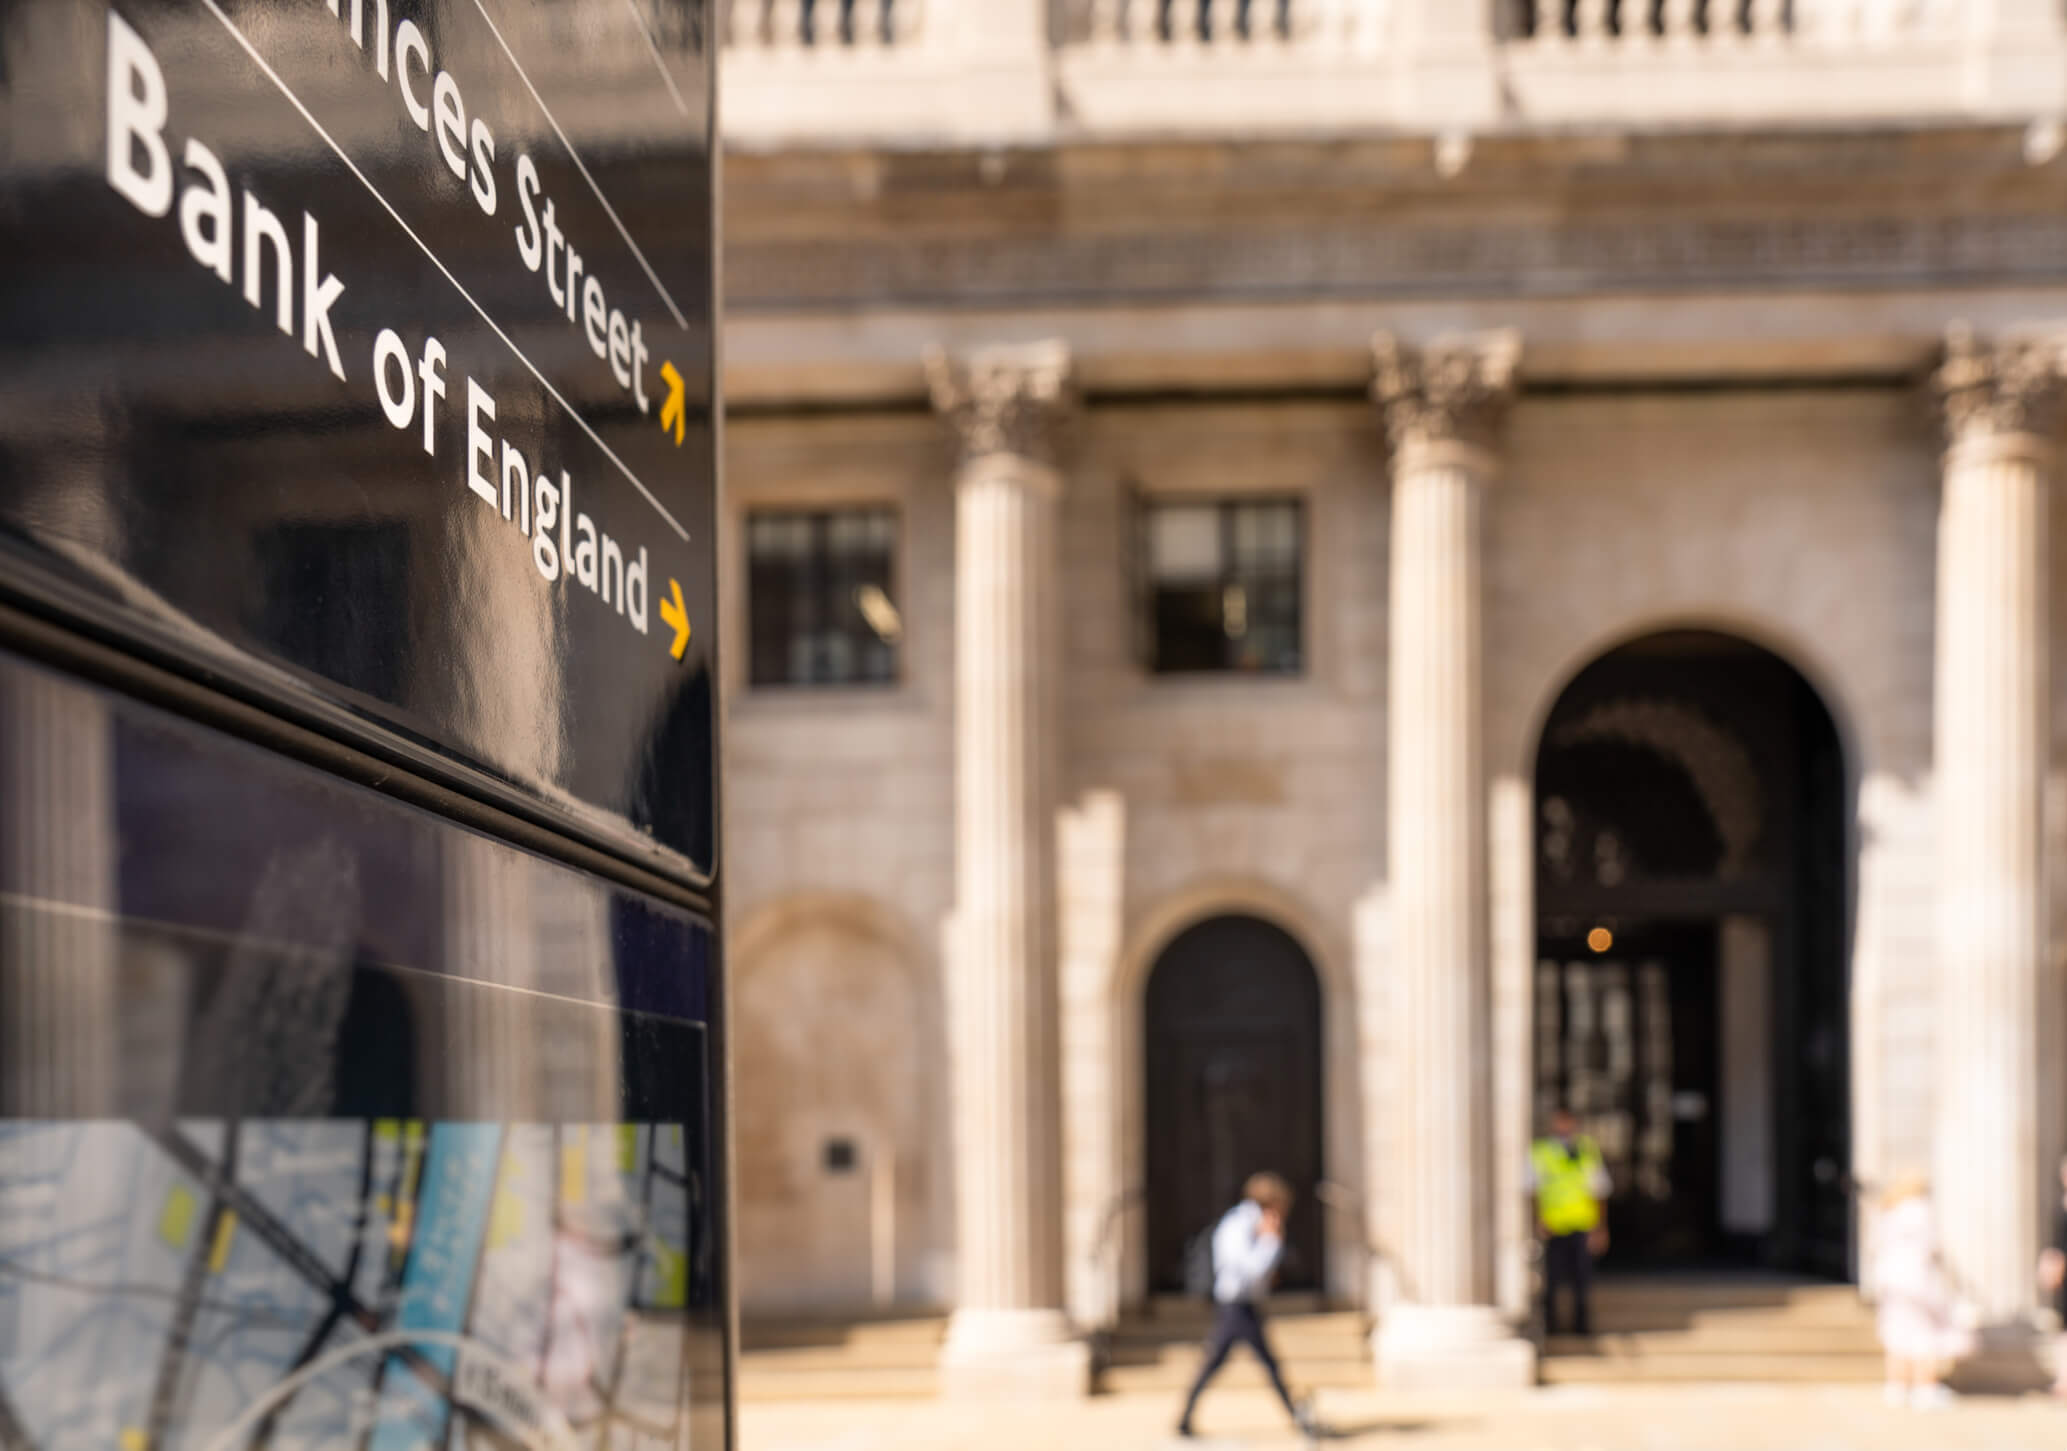 A sign outside the Bank of England building in London. The B of E has increased interest rates for 14 months straight and it's making life harder for small business owners.